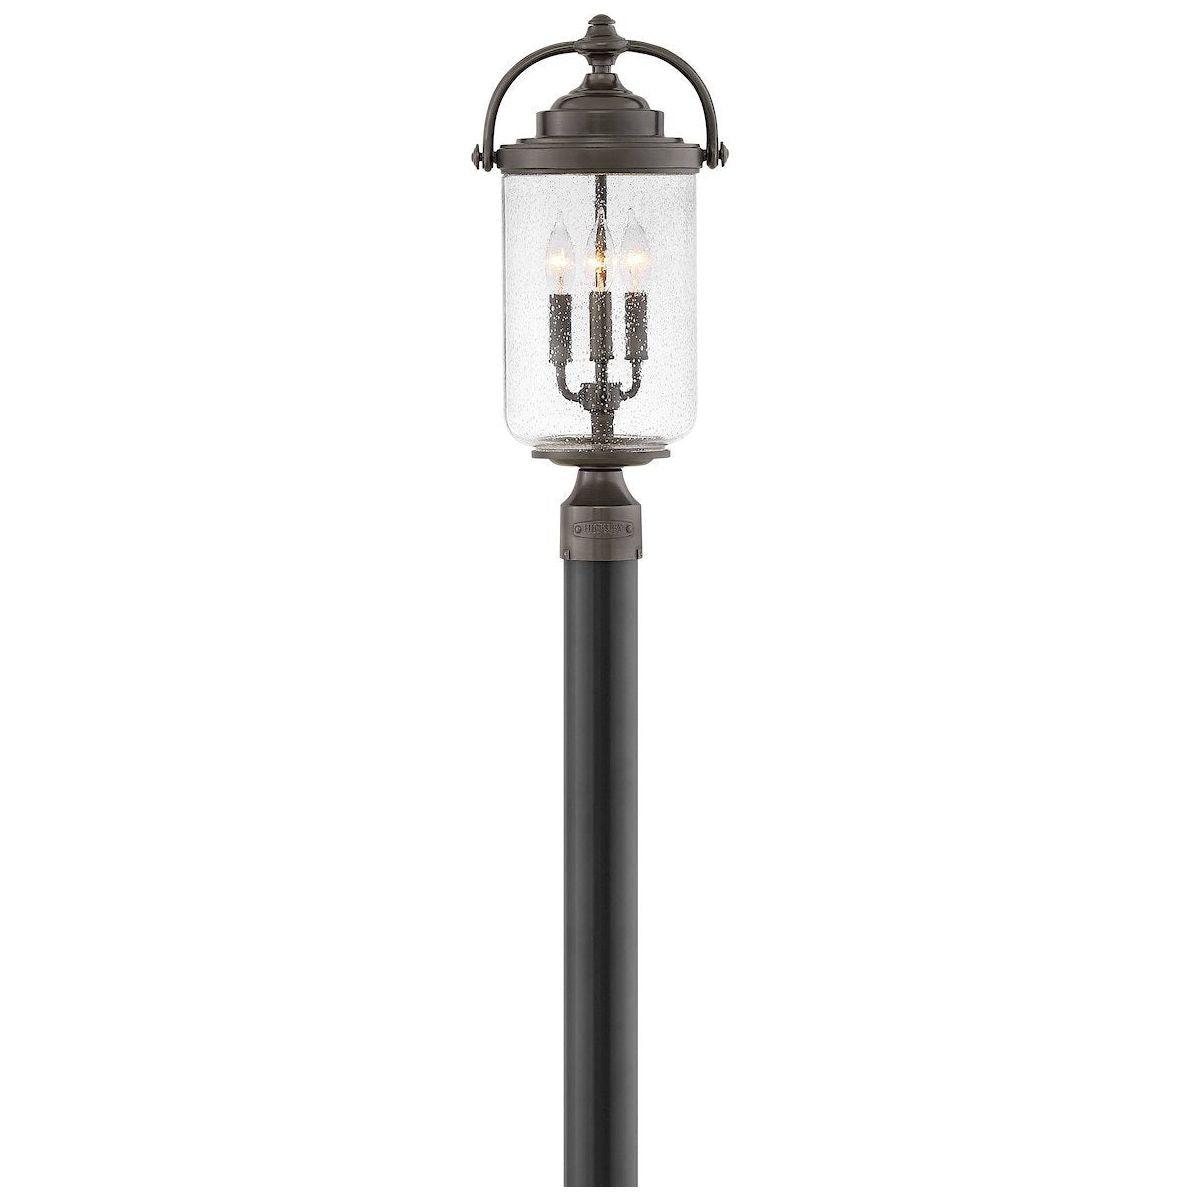 Hinkley - Willoughby Outdoor Post Light - Lights Canada